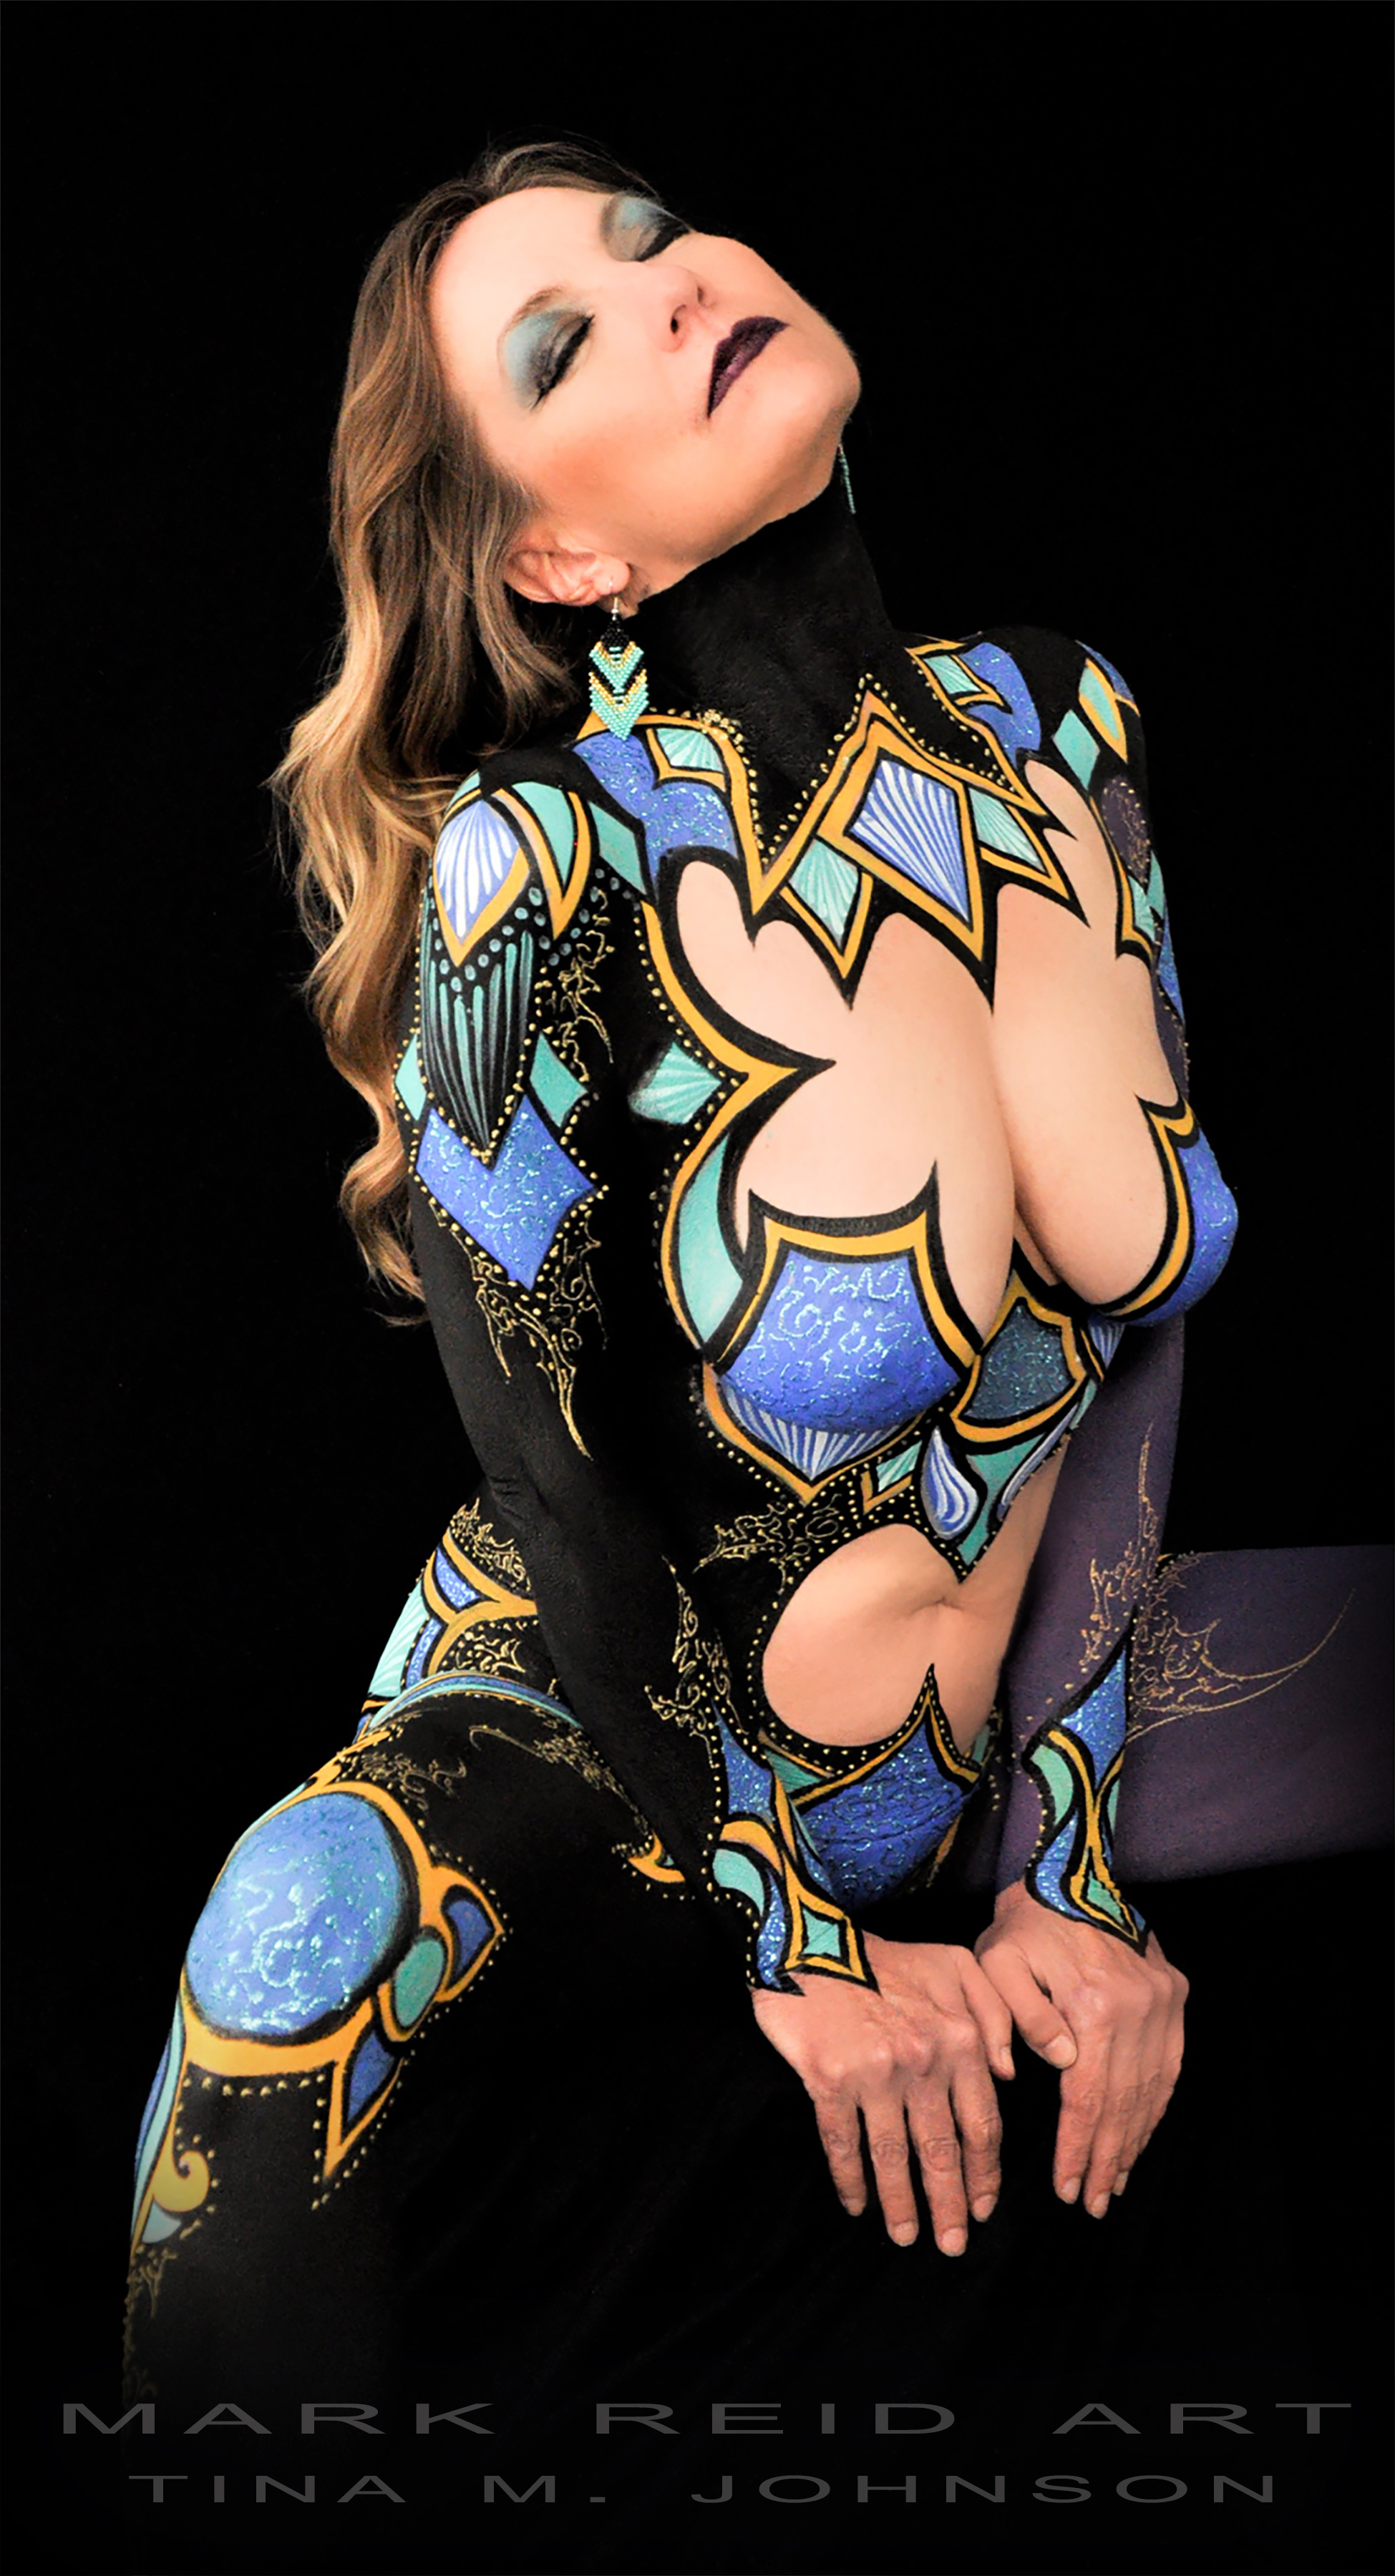 Best of Painted body art photos